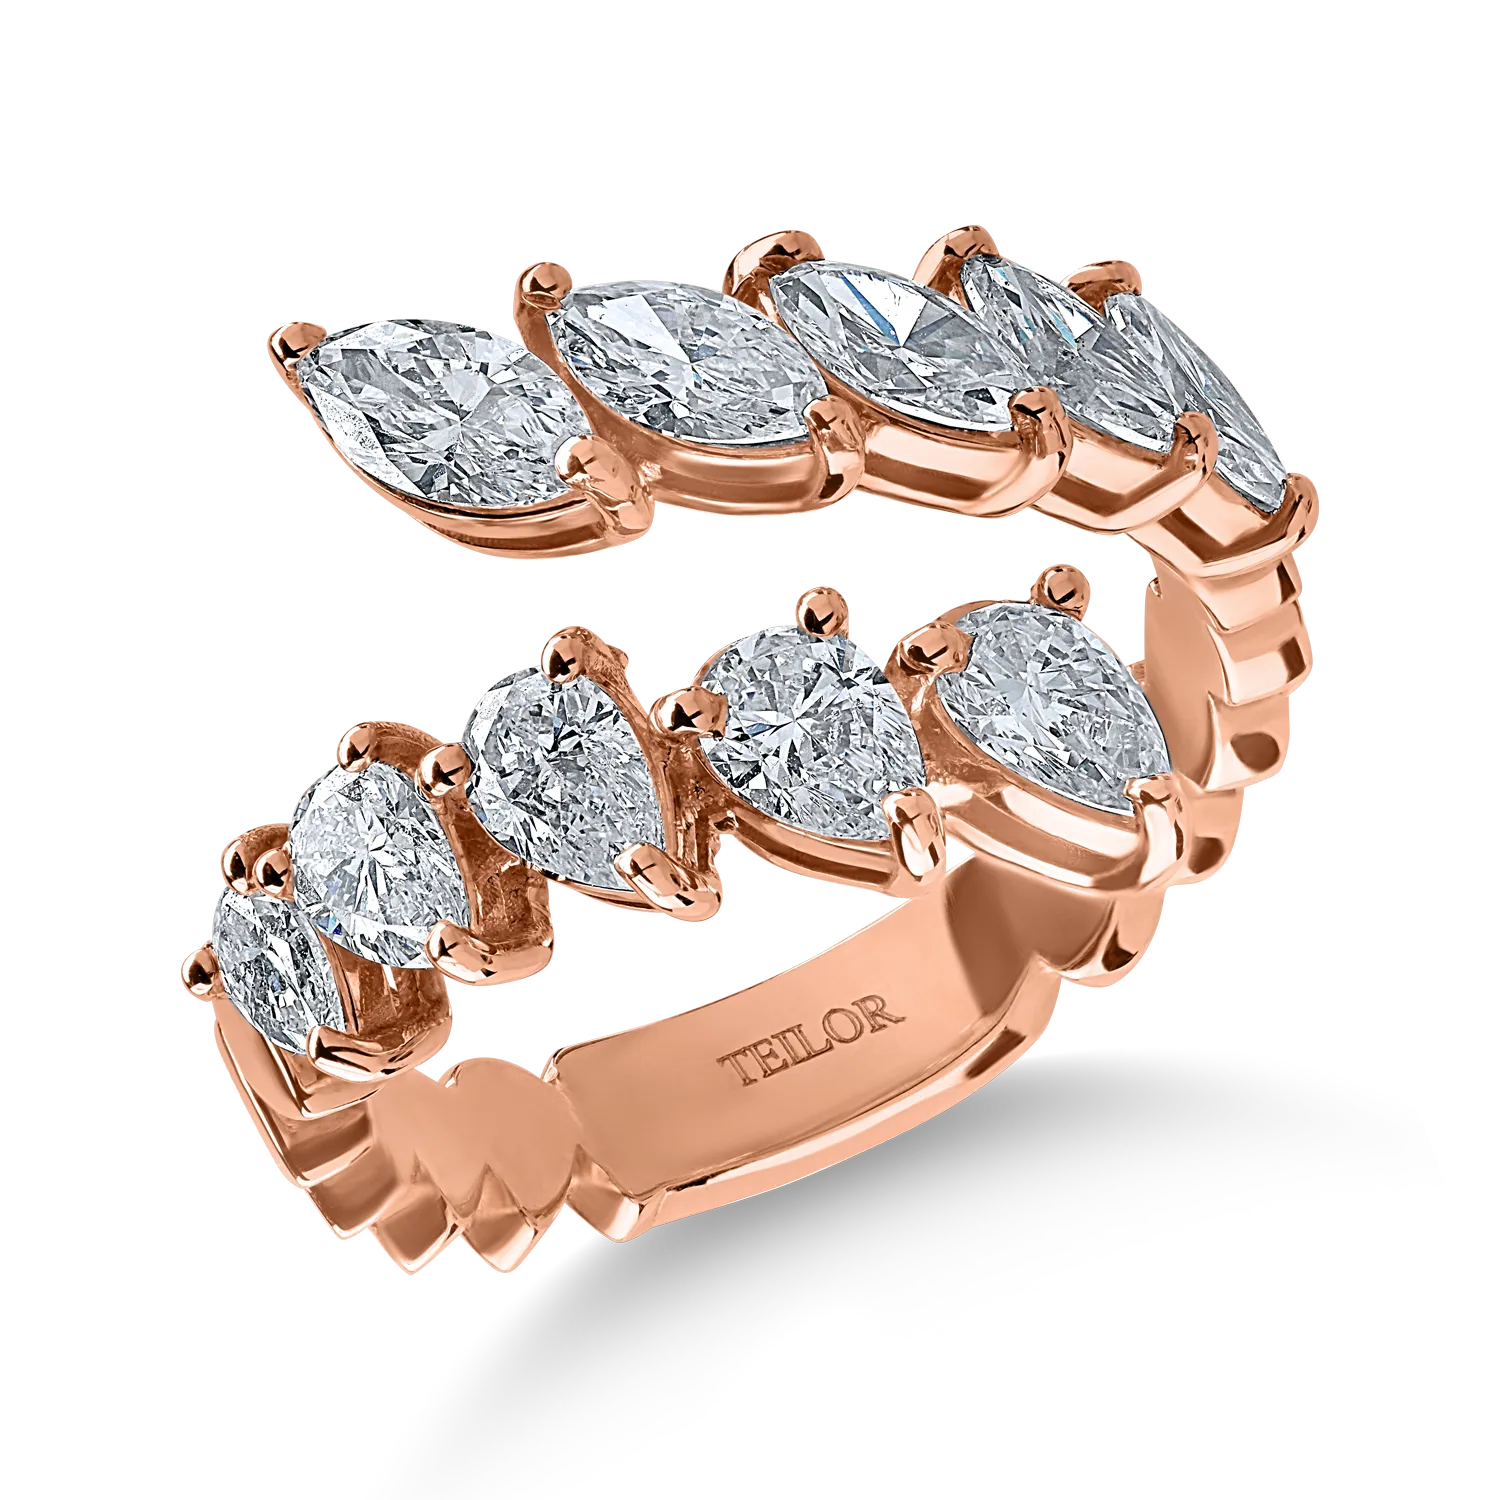 Rose gold ring with 1.87ct diamonds